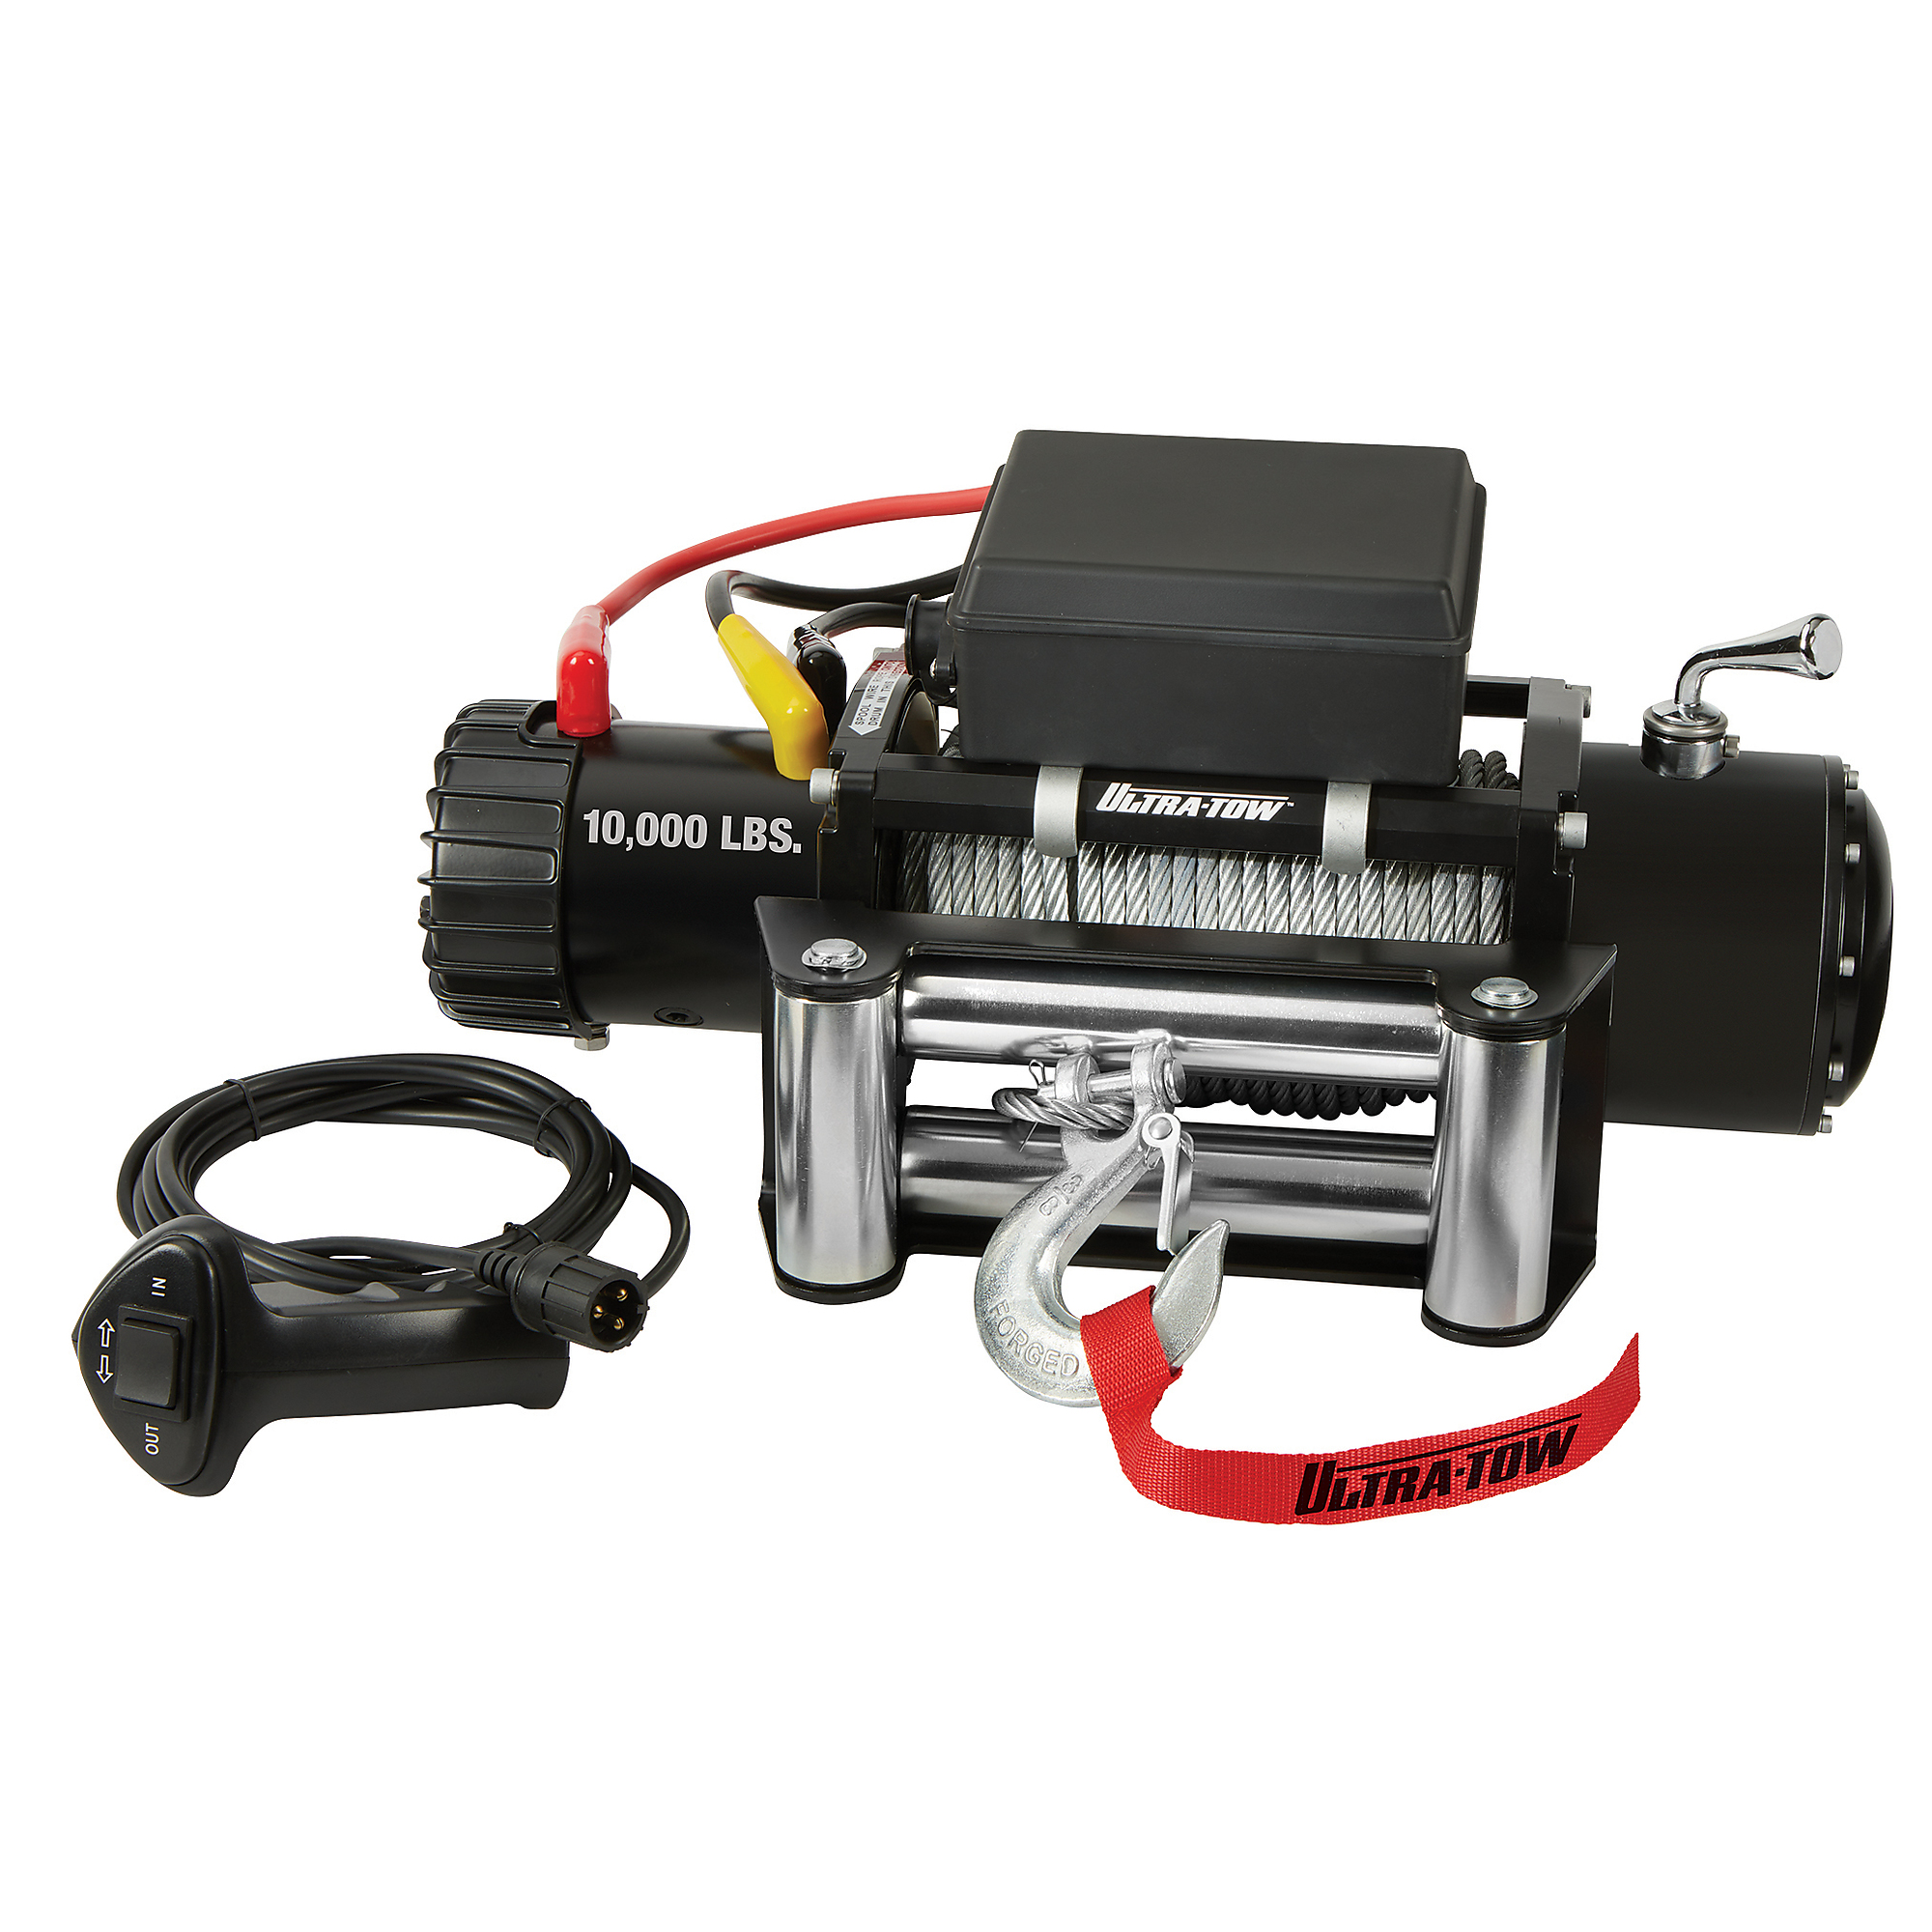 Ultra-Tow 12 Volt DC Off-Road Vehicle Winch, 10,000-Lb. Capacity, Galvanized Wire Rope, Model LD-D10000